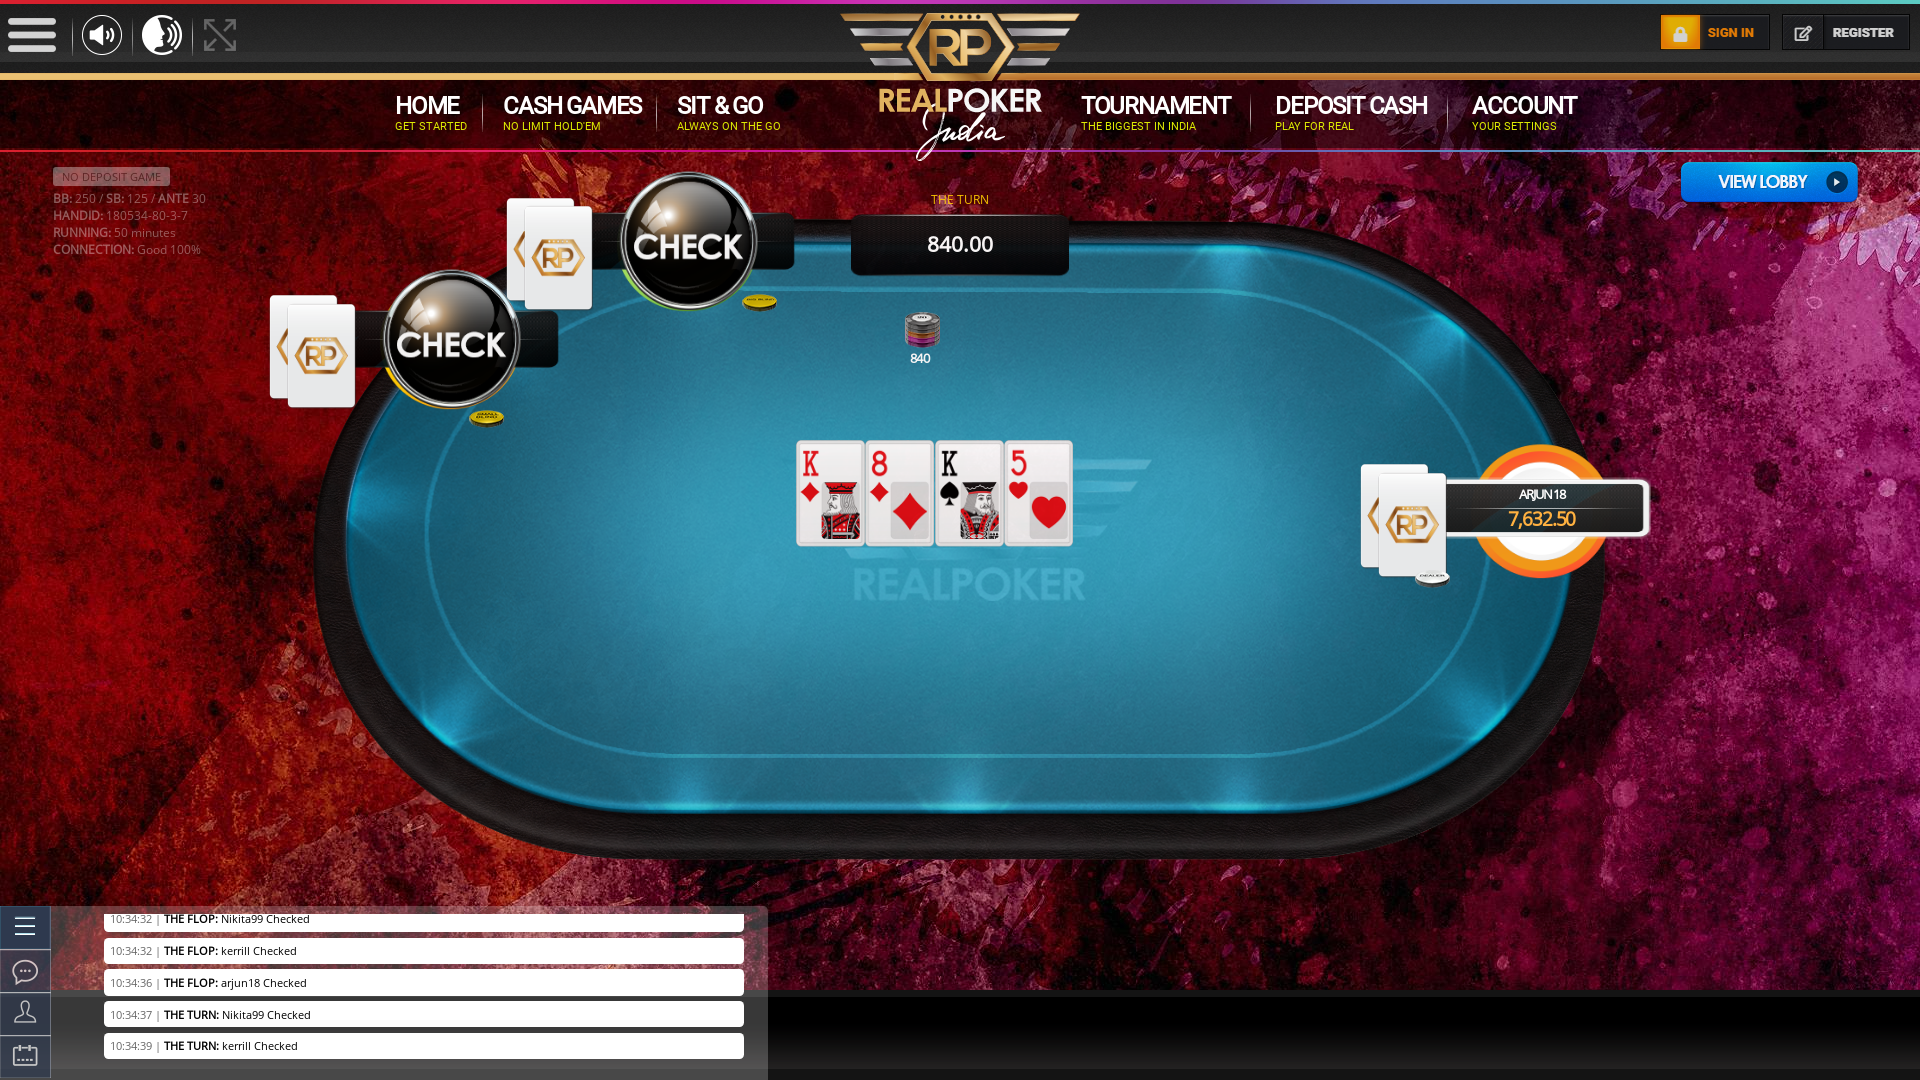 Nikita99 playing some superb high risk poker hands